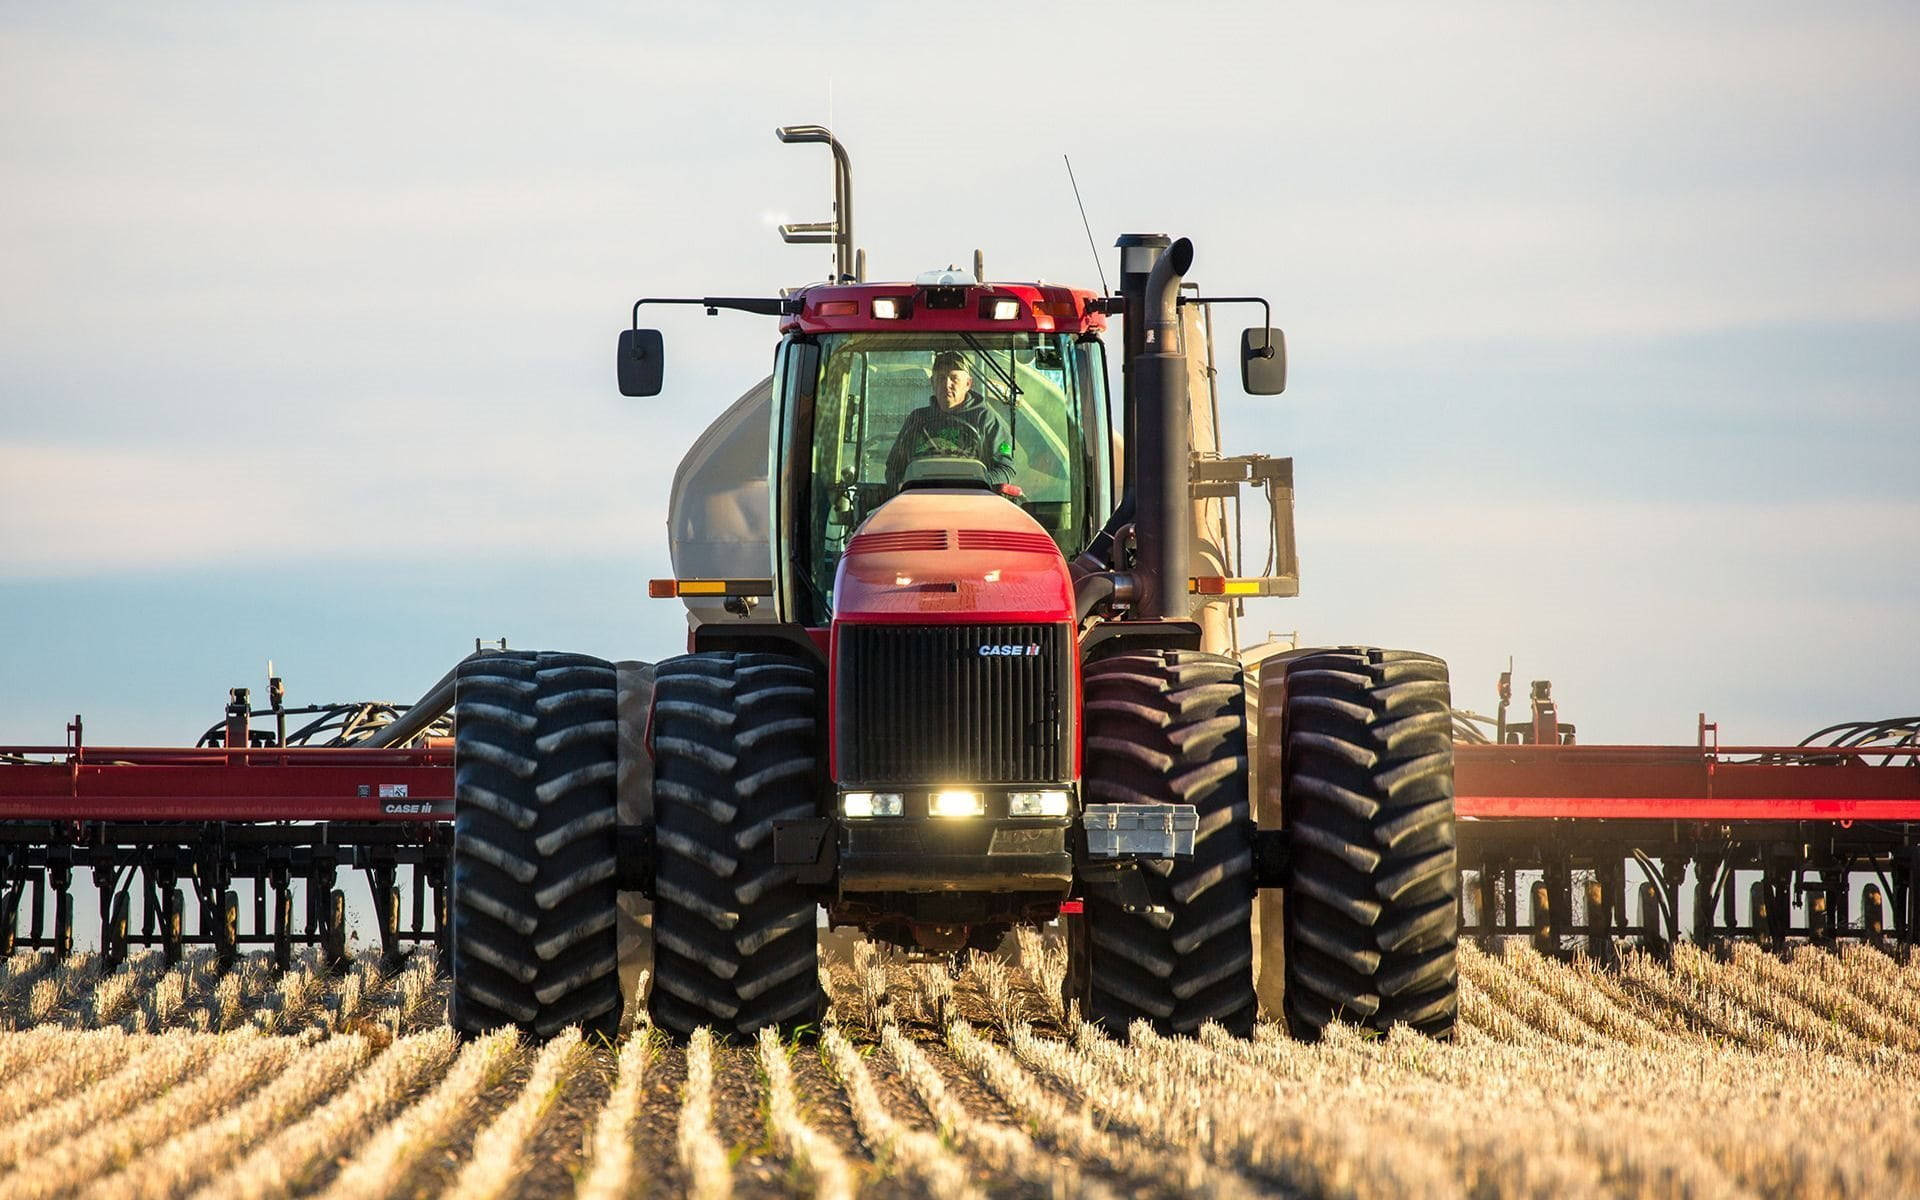 Tractor Photos Download The BEST Free Tractor Stock Photos  HD Images